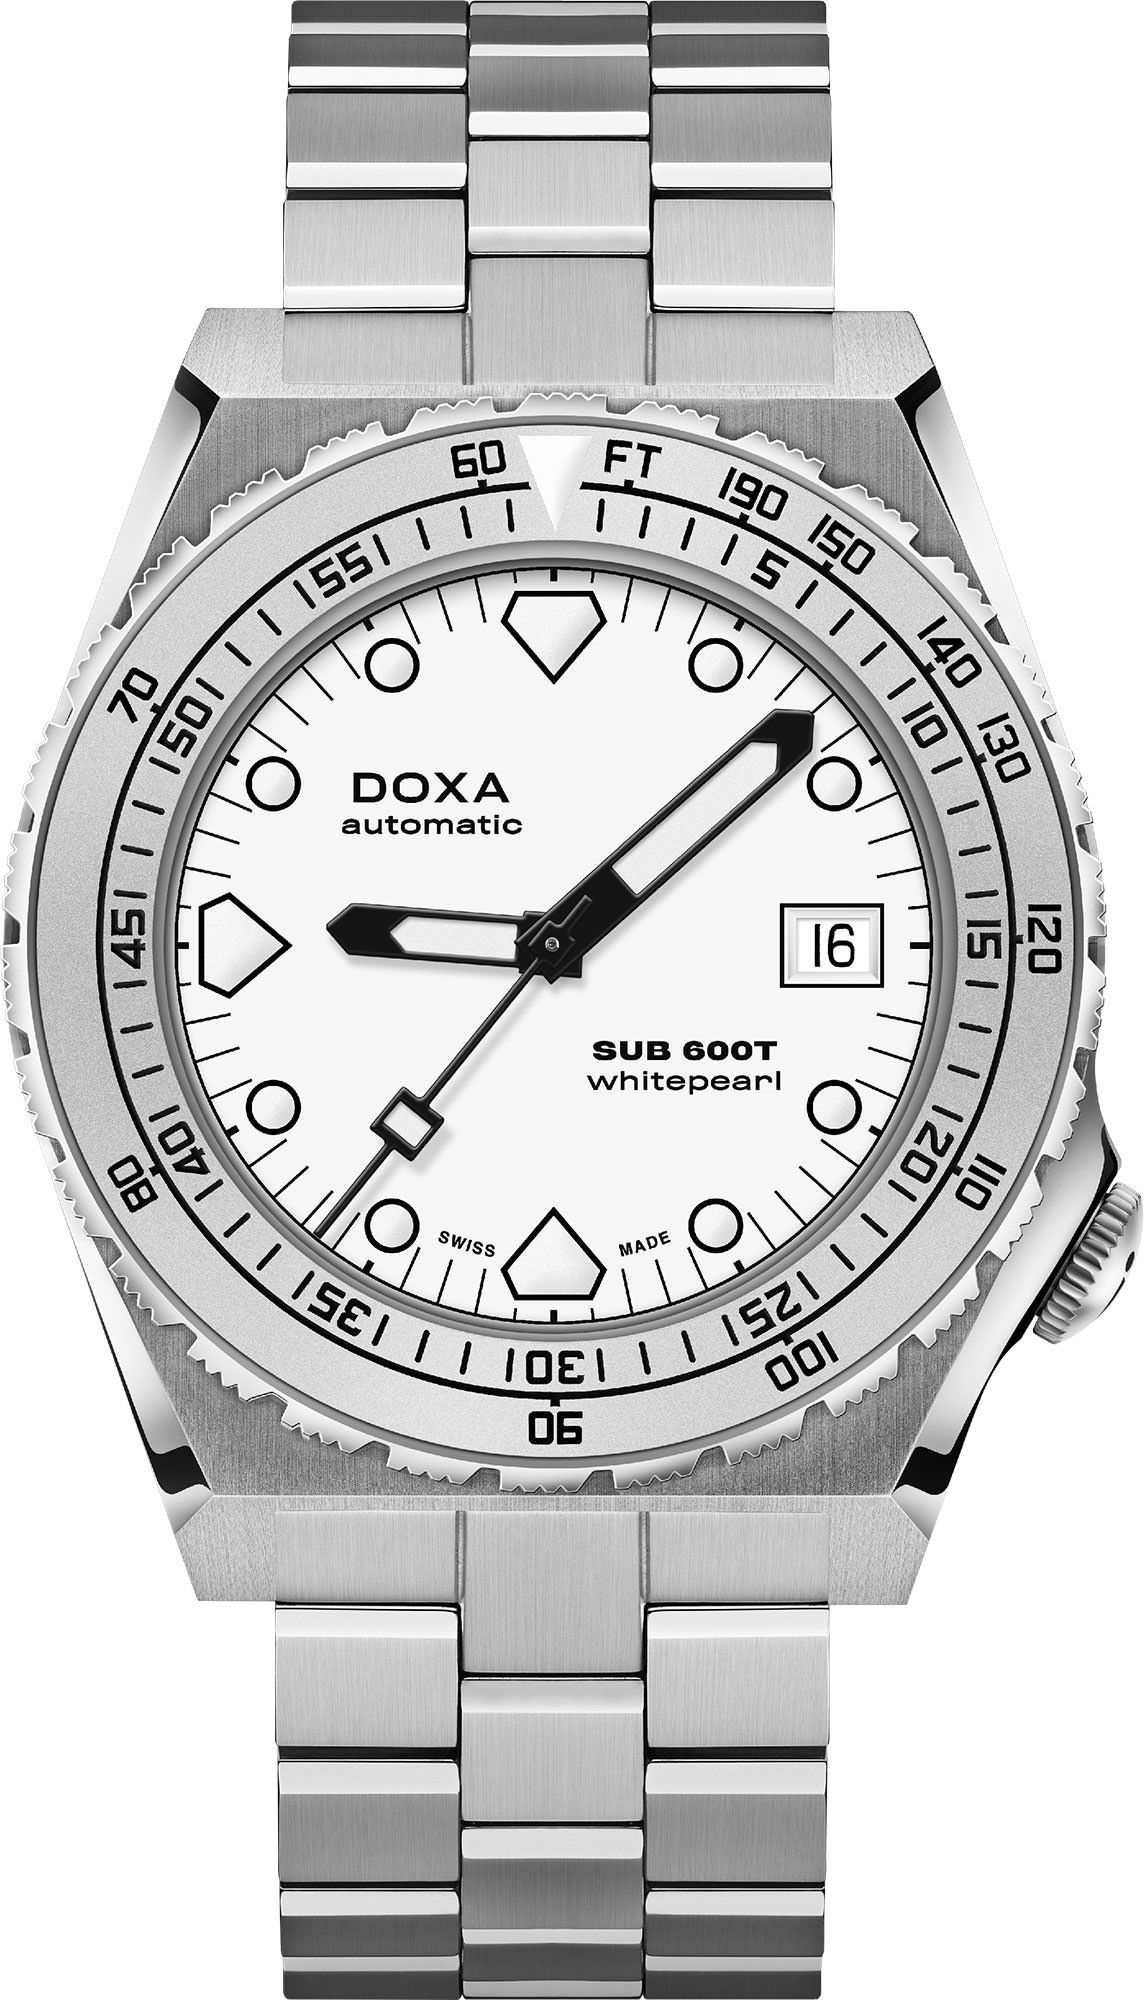 Doxa SUB 600T Whitepearl White Dial 40 mm Automatic Watch For Men - 1